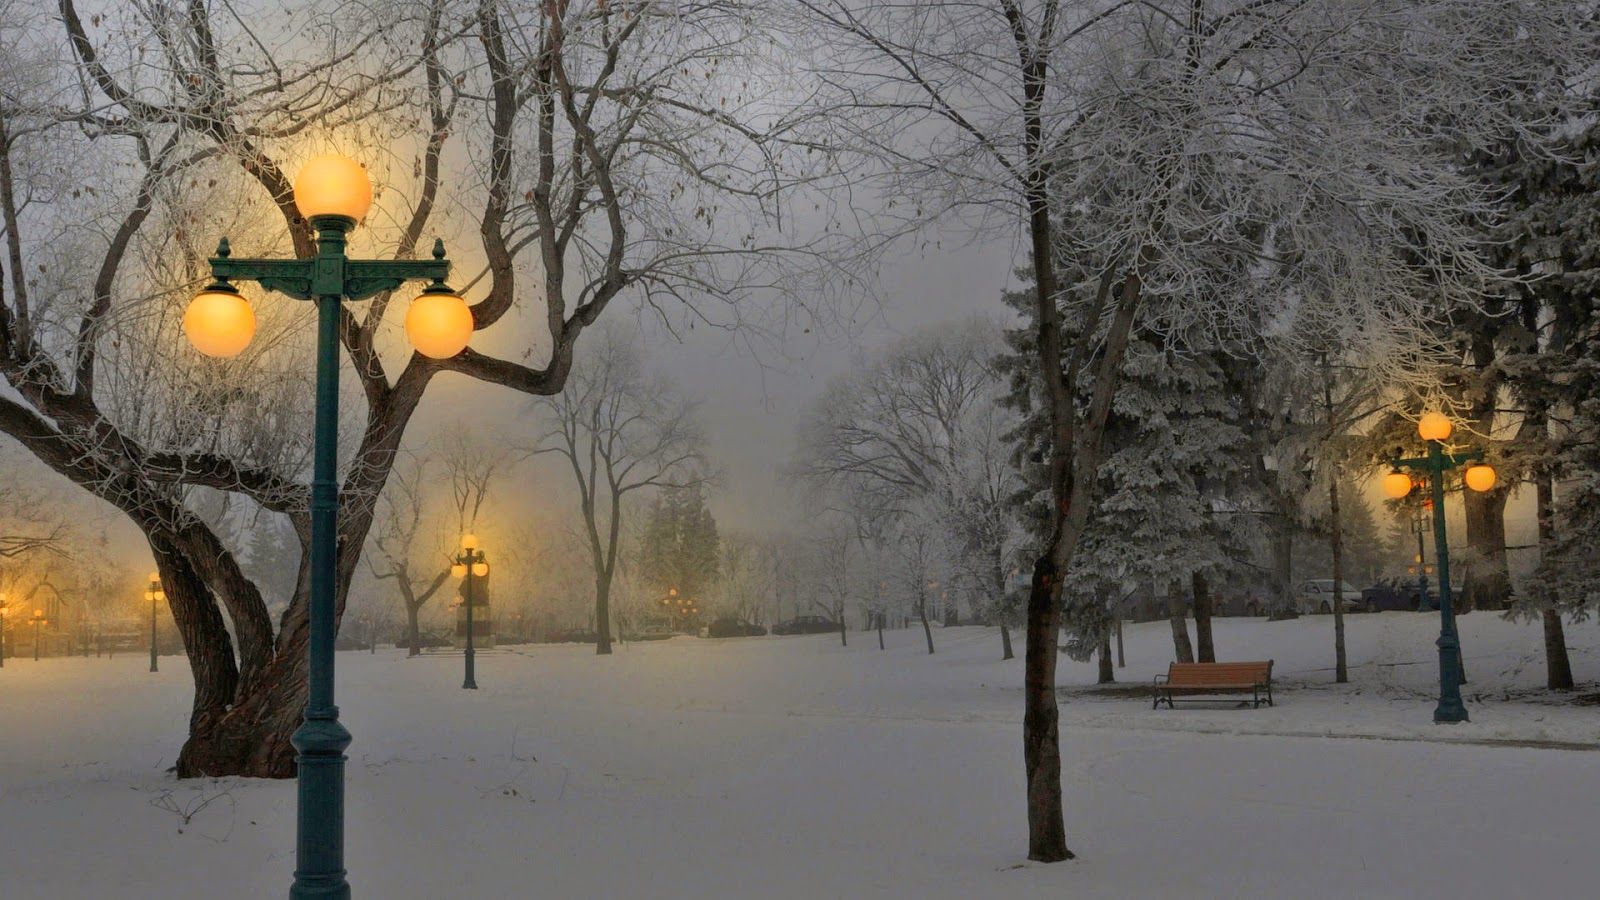 An early winter morning [Image]. Winter wallpaper, Scenery wallpaper, Free winter wallpaper